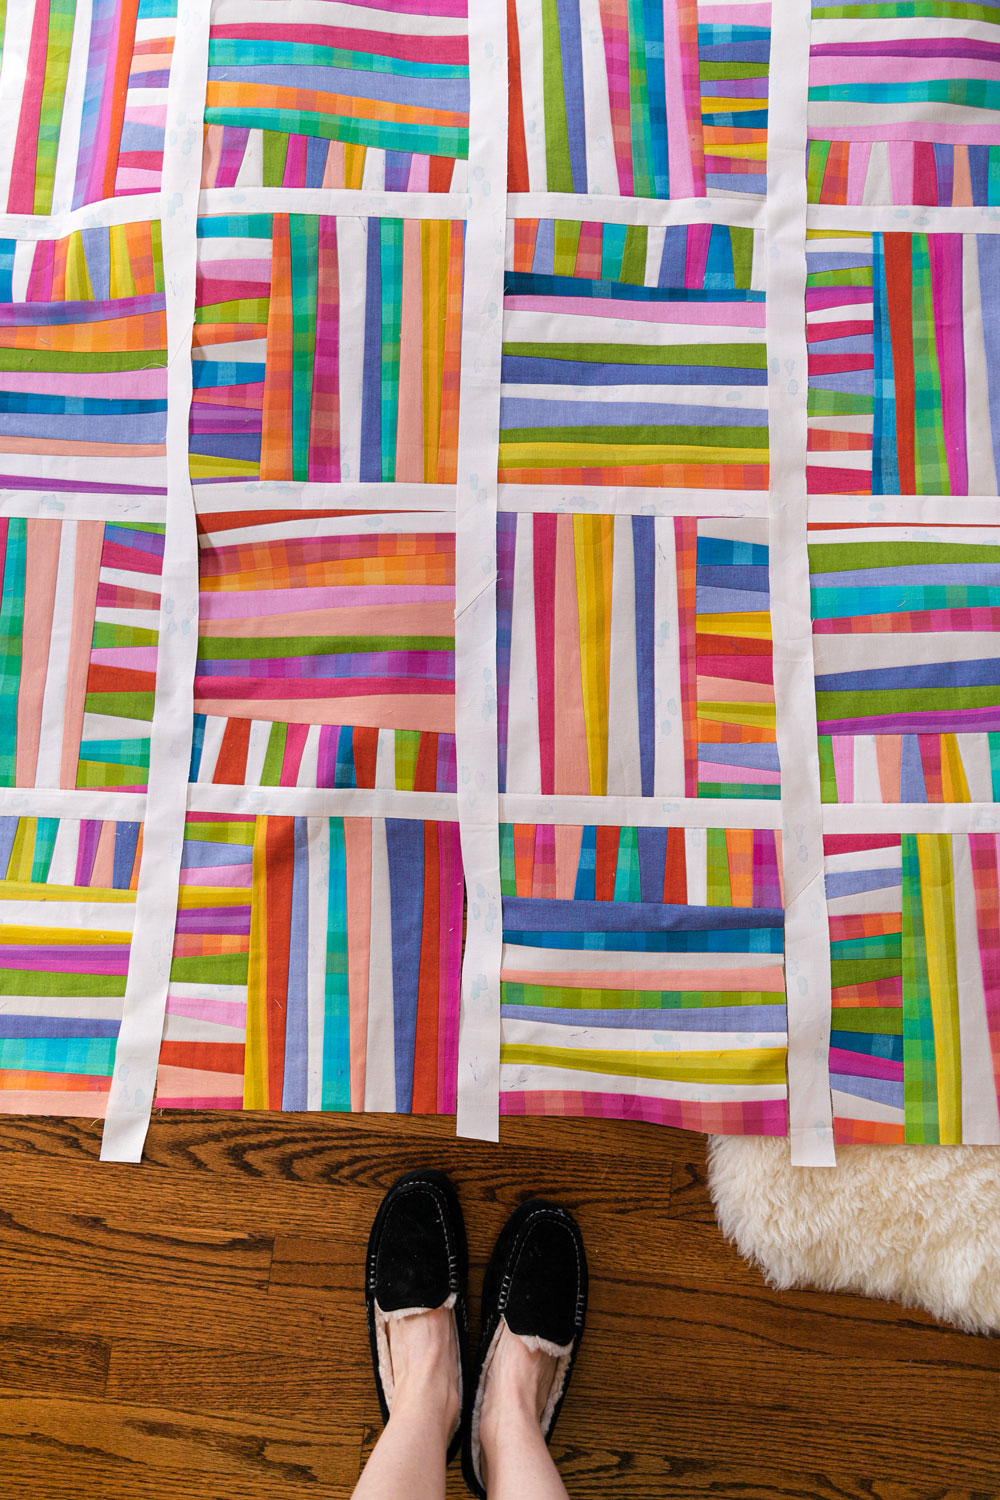 The Shine quilt sew along includes lots of added tips and videos to help you make this modern quilt pattern. This fat quarter quilt pattern is beginner friendly and focuses on improv sewing. suzyquilts.com #fatquarterpattern #quilting